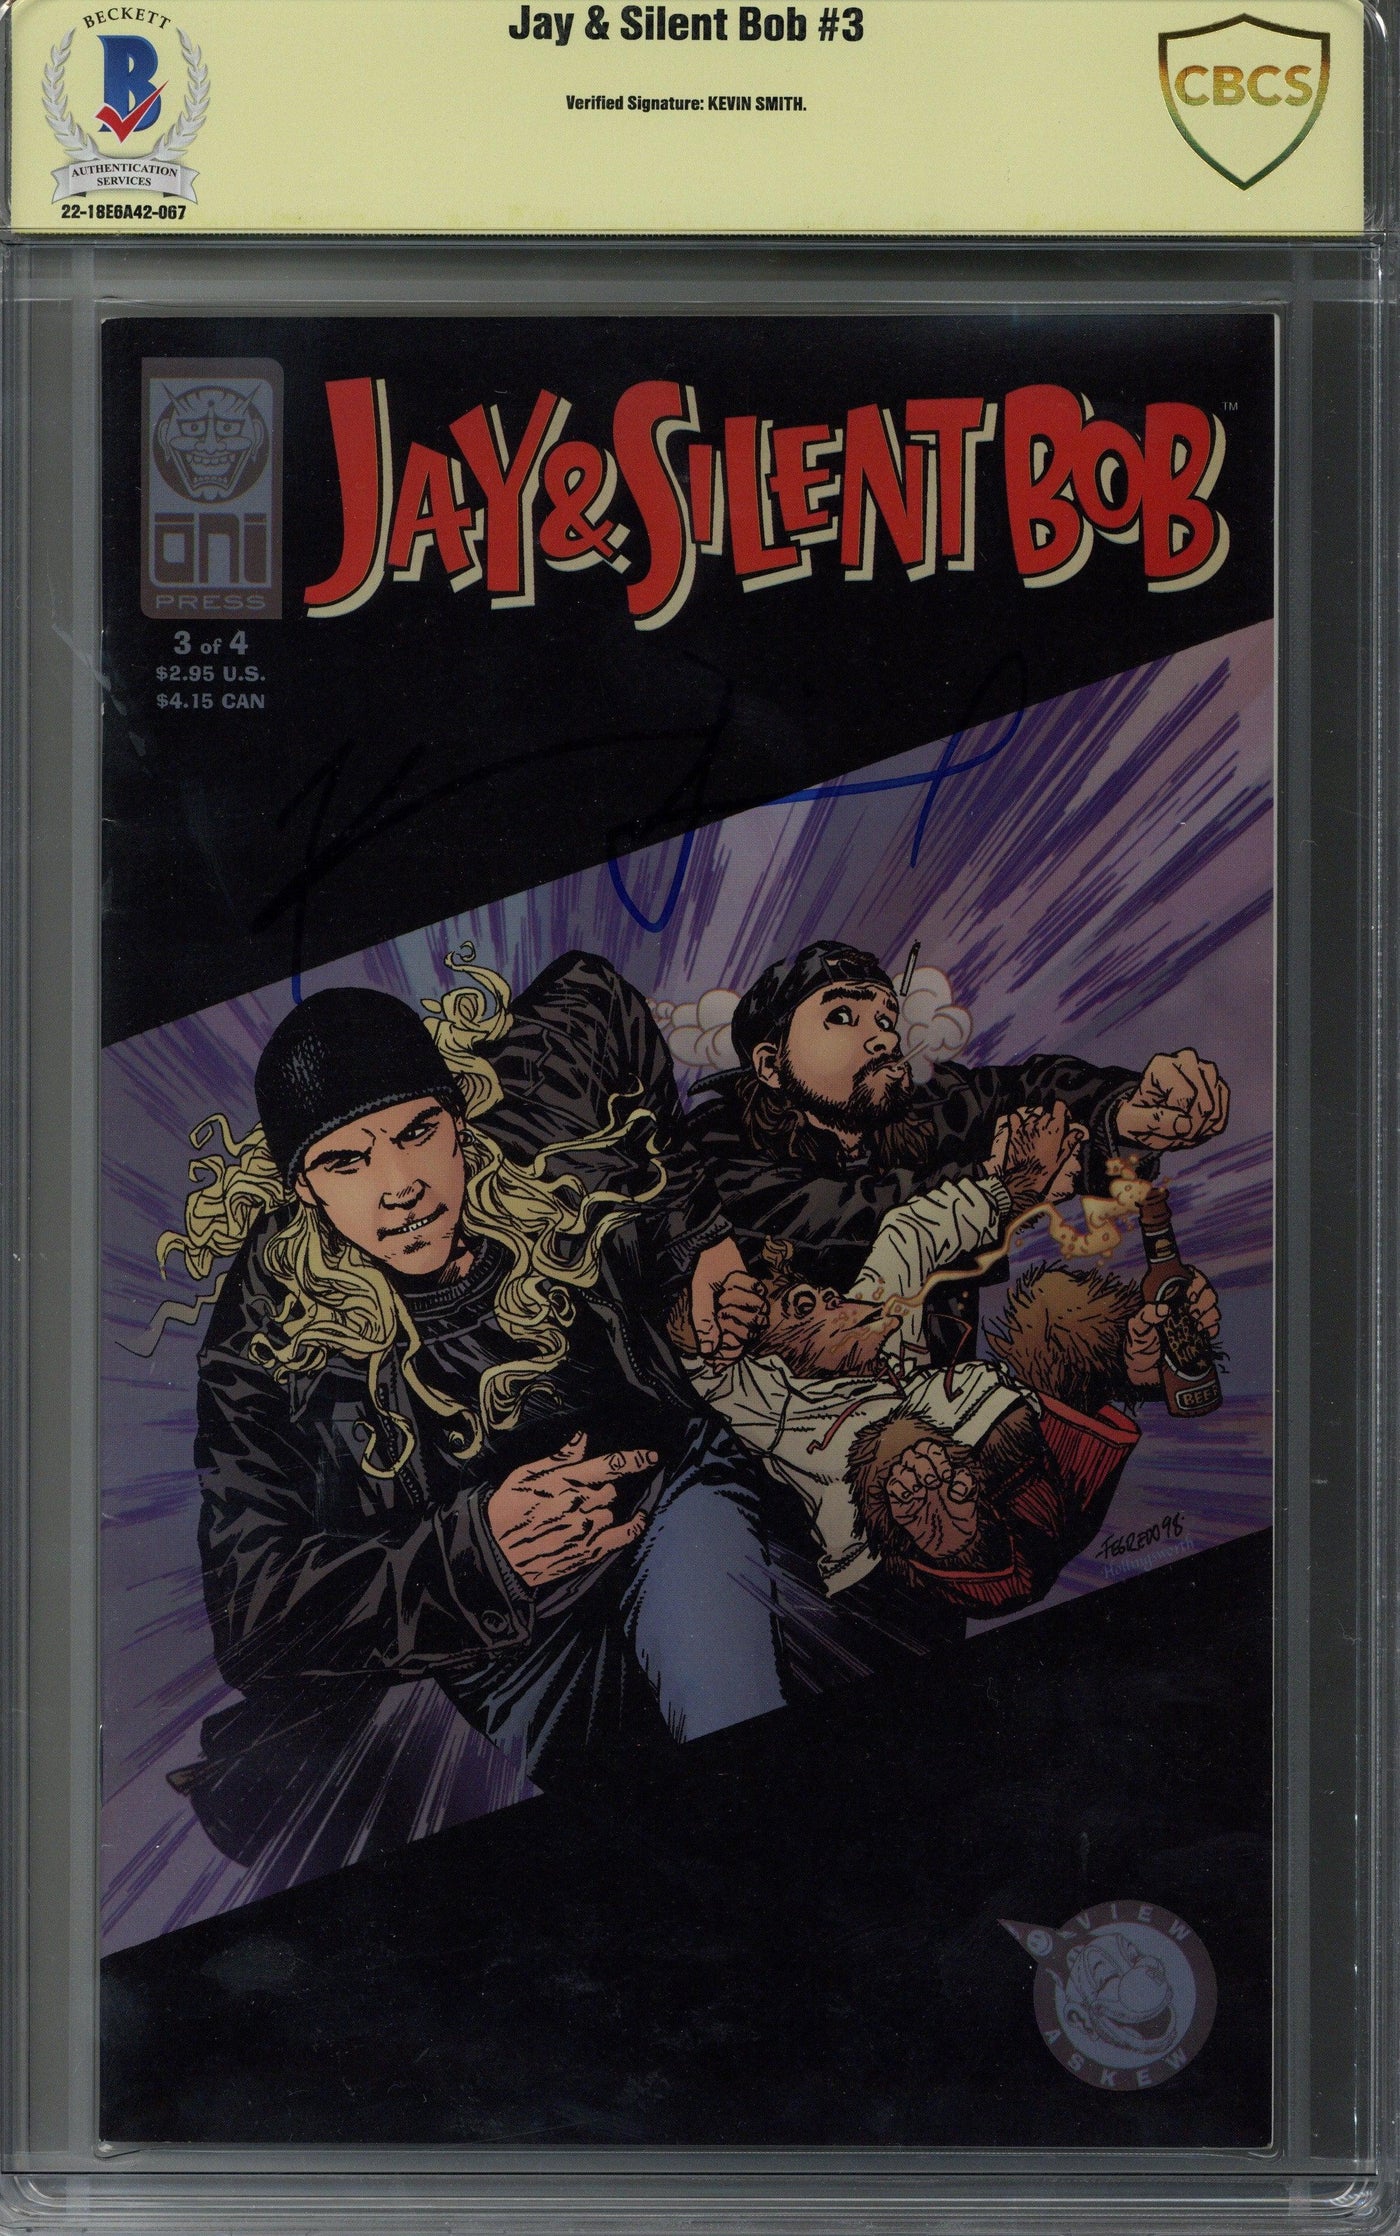 KEVIN SMITH SIGNED Jay & Silent Bob #3 Autographed CBCS